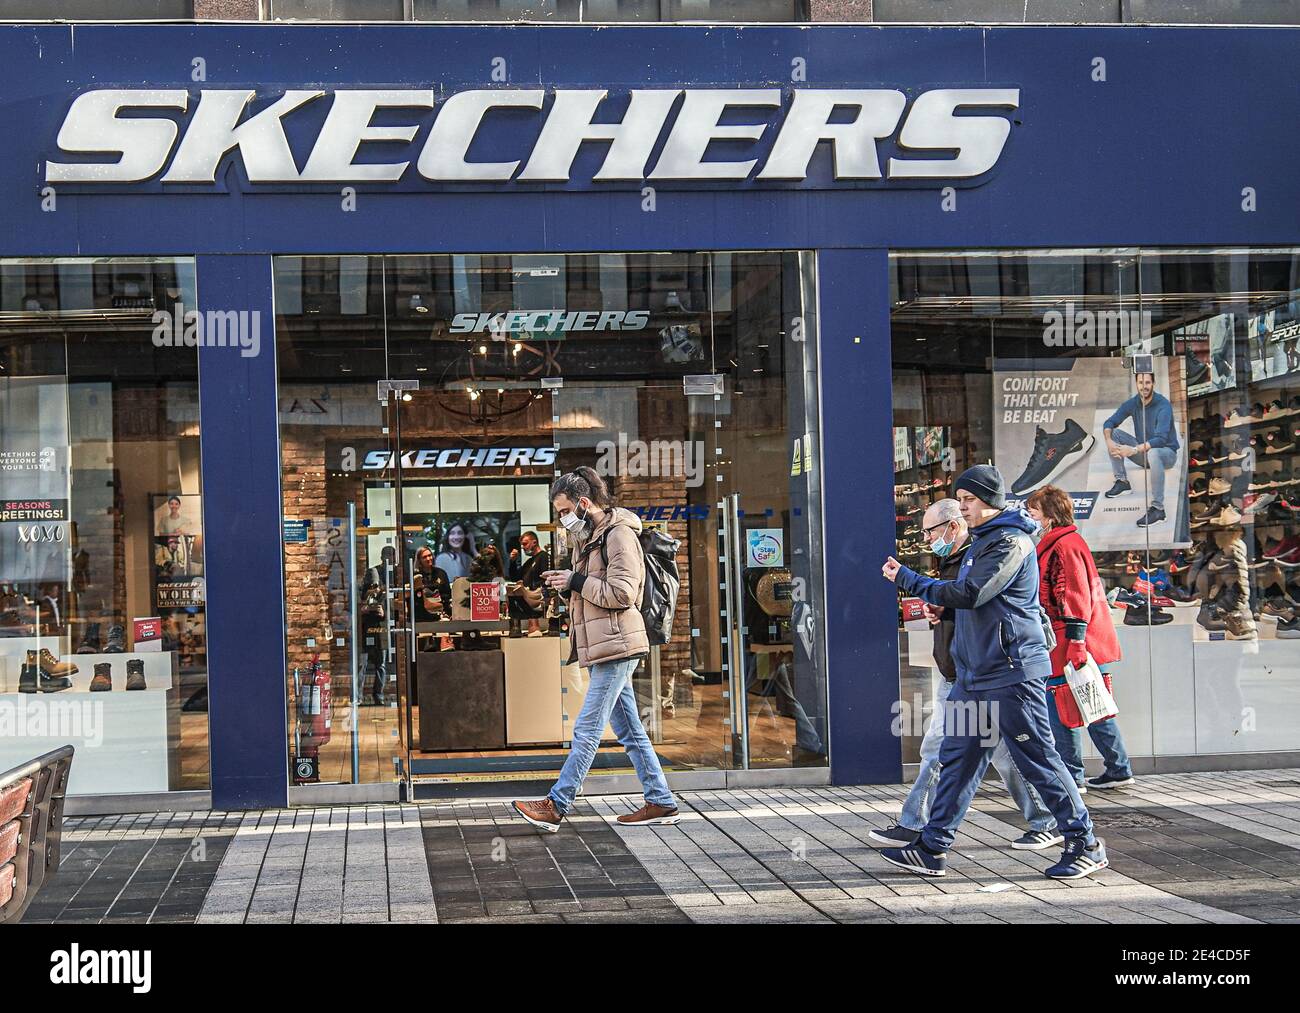 Sketchers Store High Resolution Stock Photography and Images - Alamy